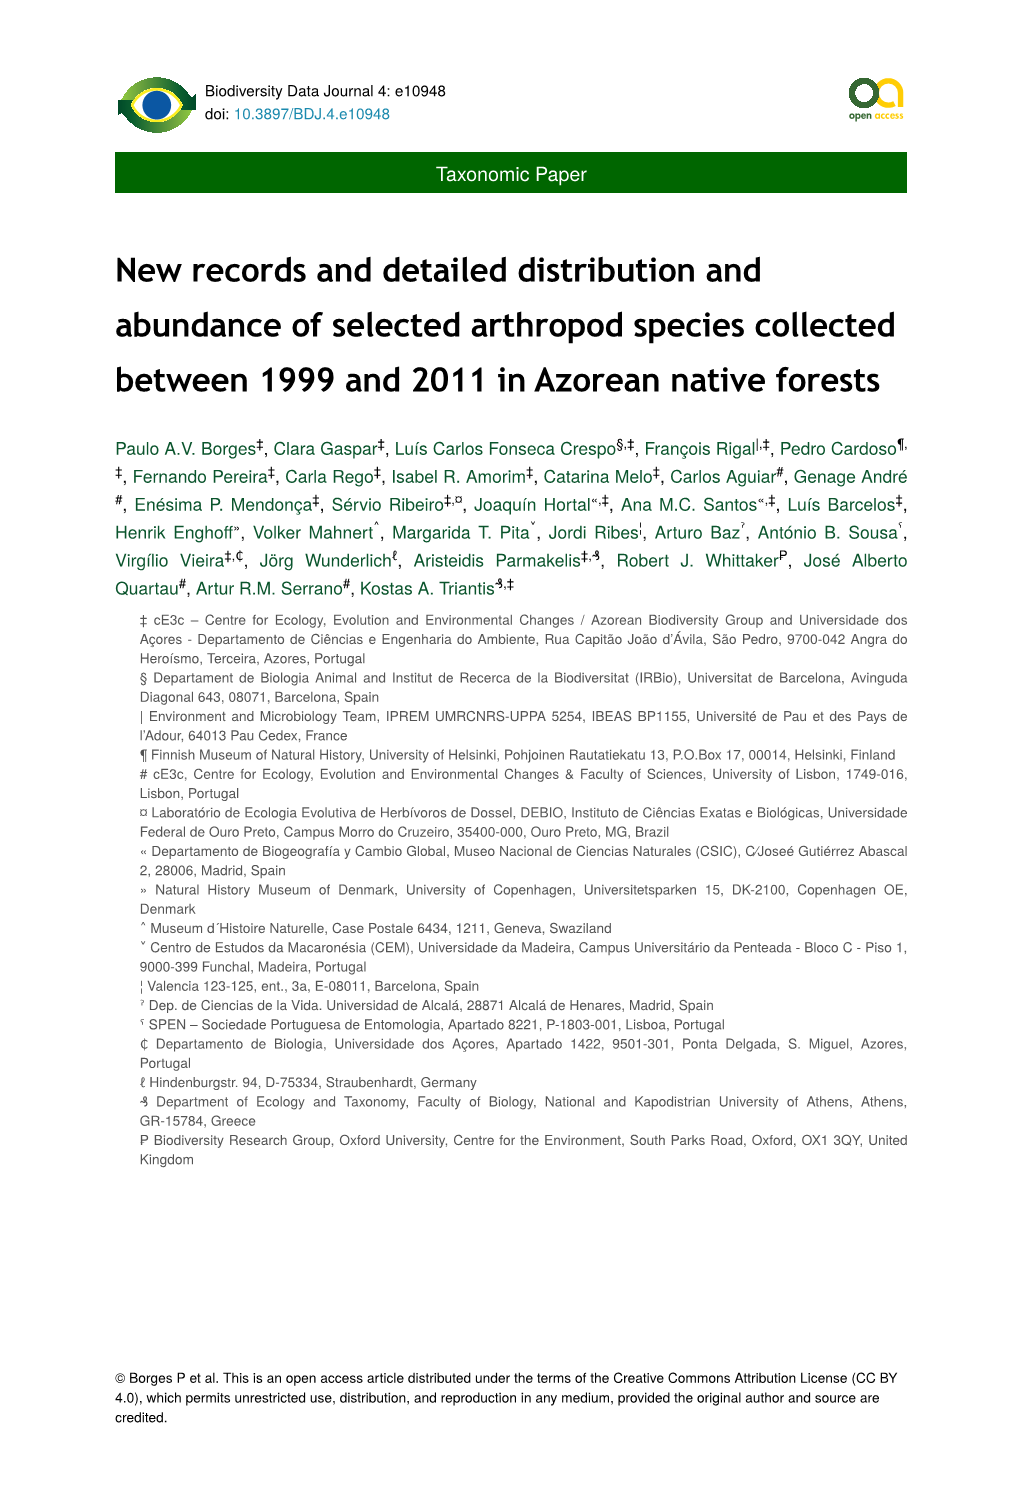 New Records and Detailed Distribution and Abundance of Selected Arthropod Species Collected Between 1999 and 2011 in Azorean Native Forests